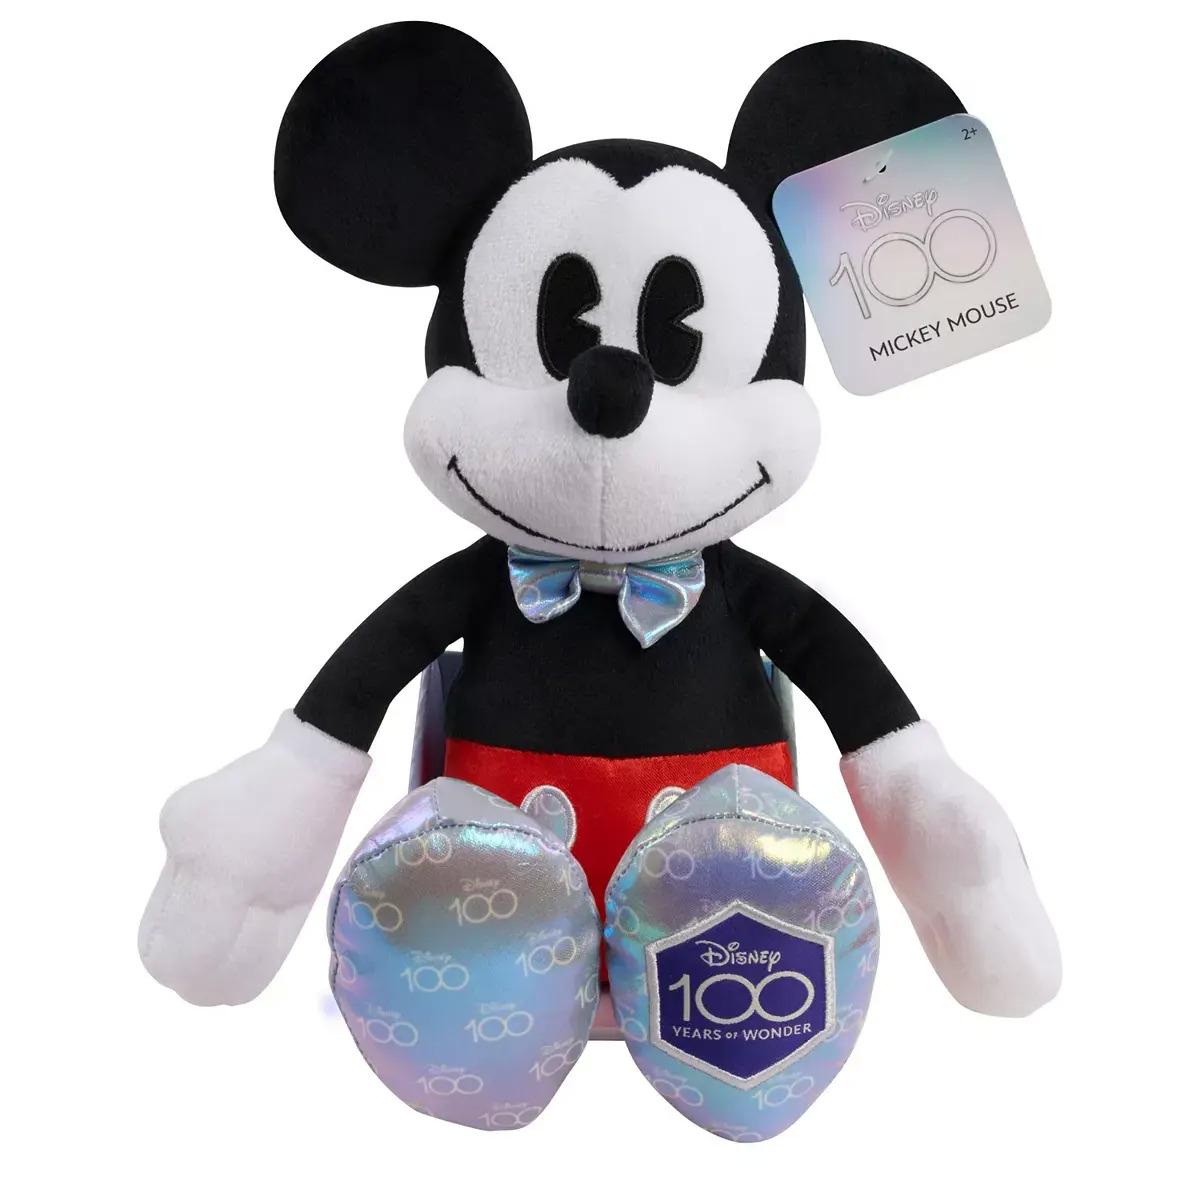 17in Disney 100 Years of Wonder Minnie and Mickey Mouse for $9.99